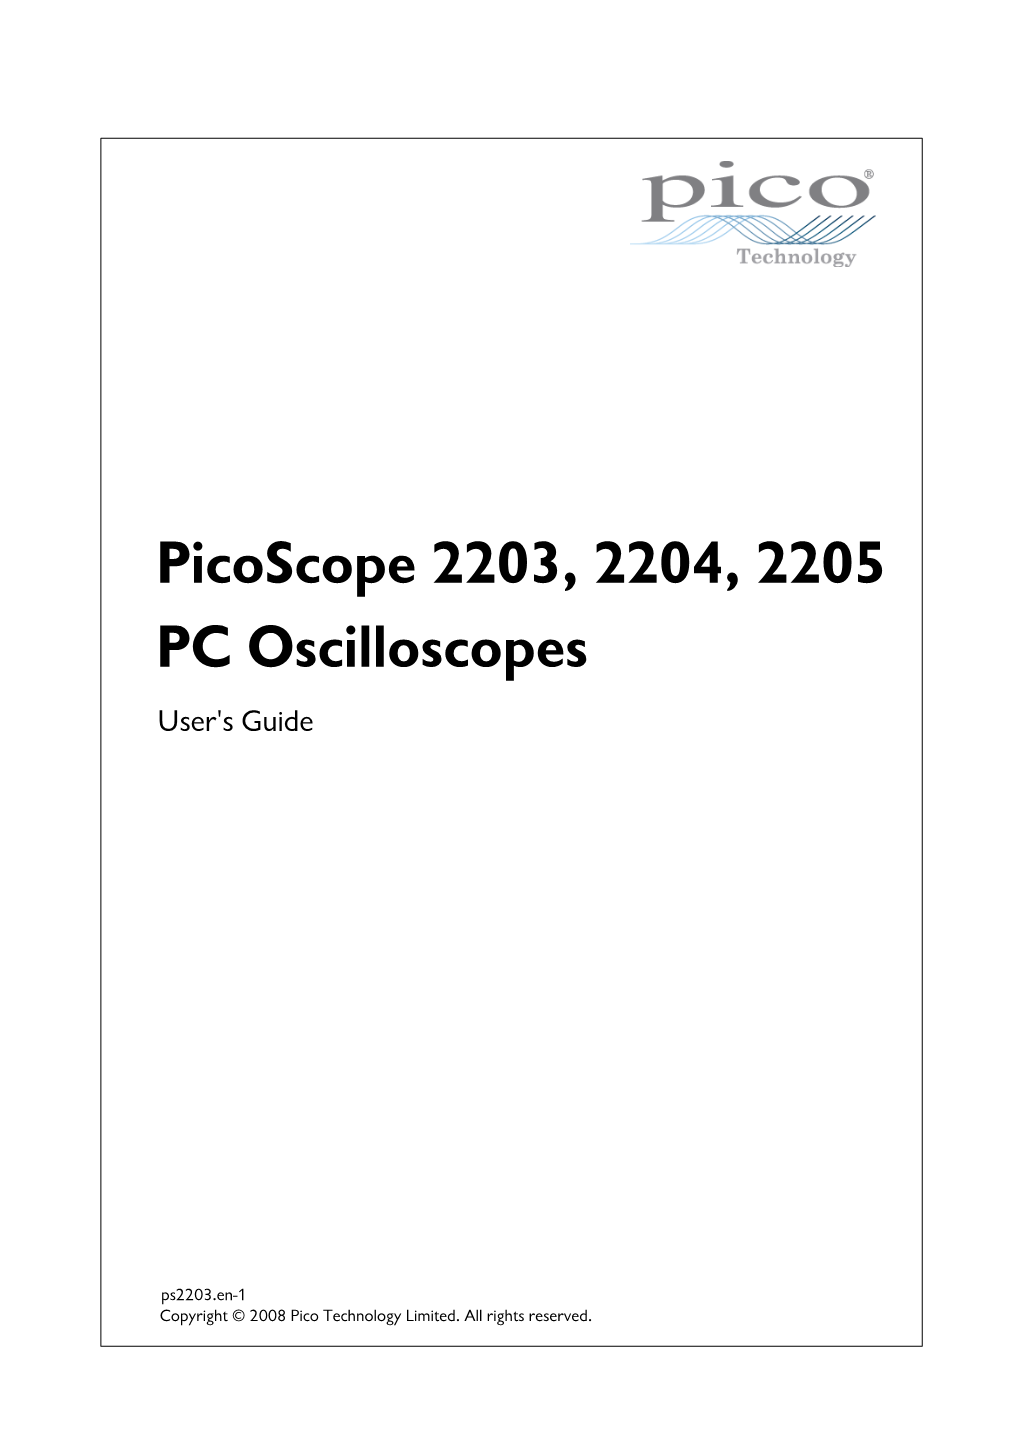 Picoscope 2000 Series User's Guide Table of Contents